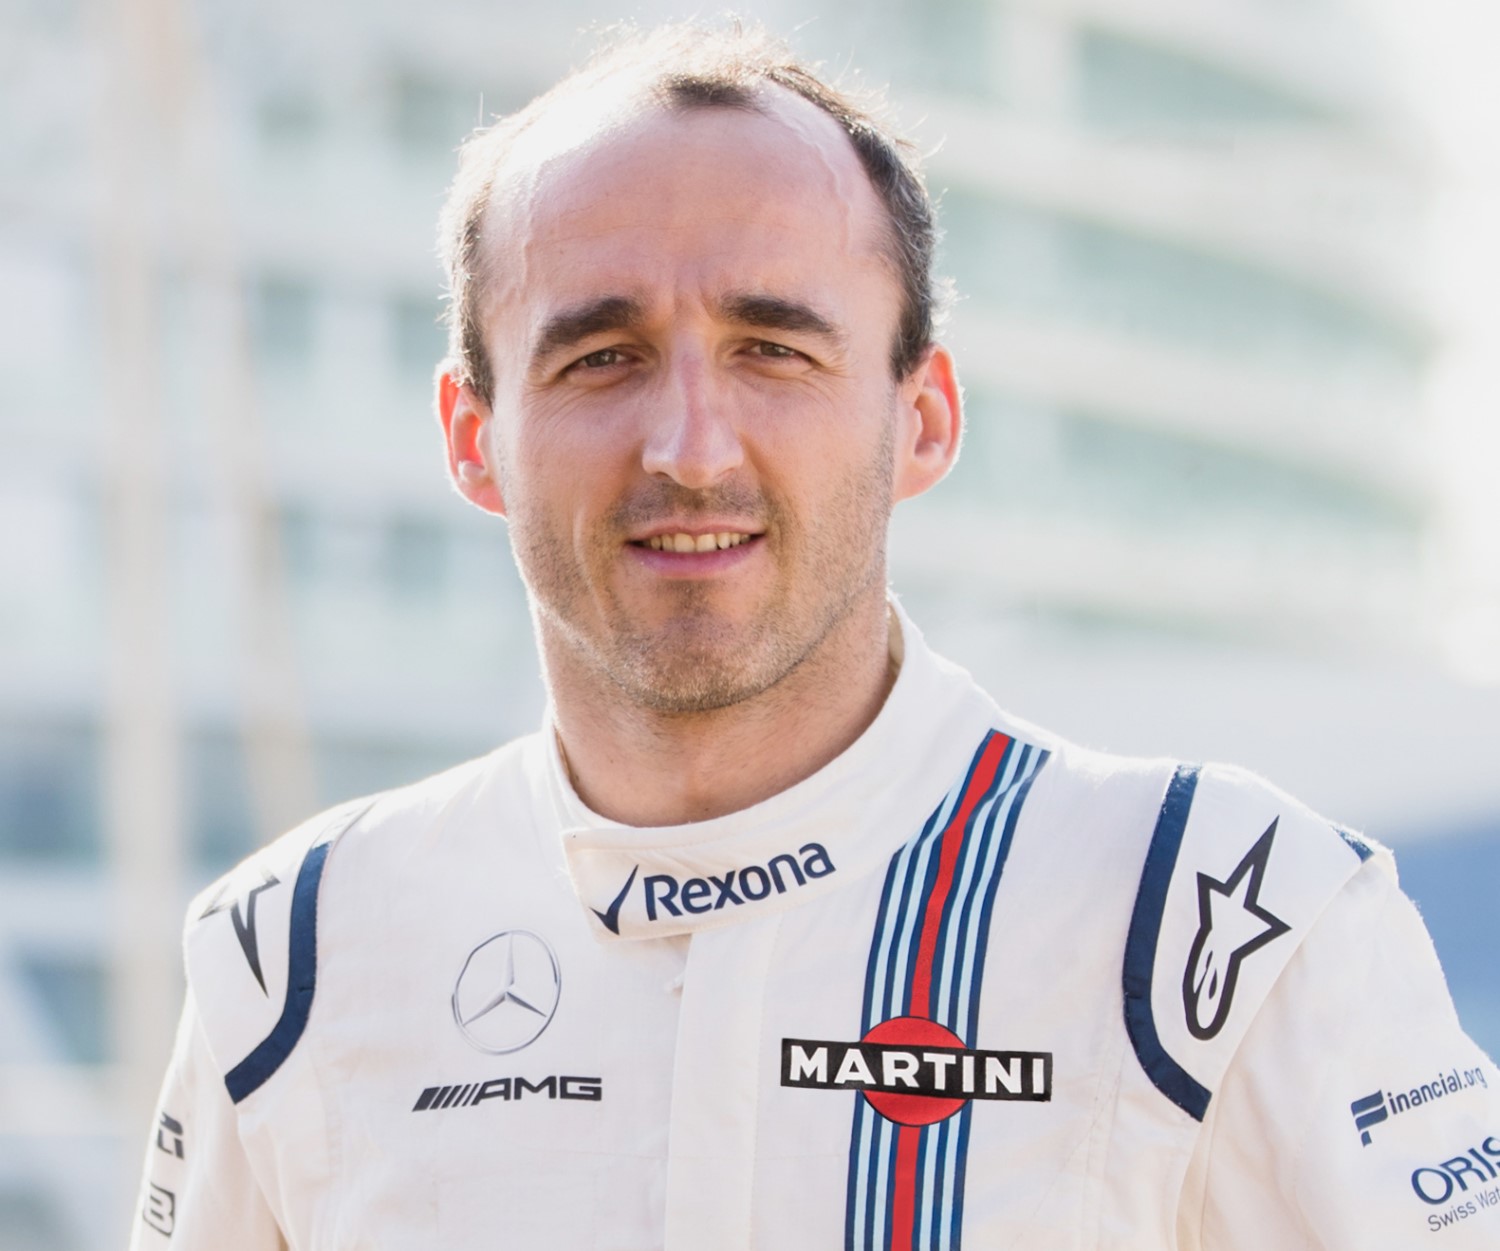 If his check is large enough next year, Robert Kubica could land a starting role at Williams